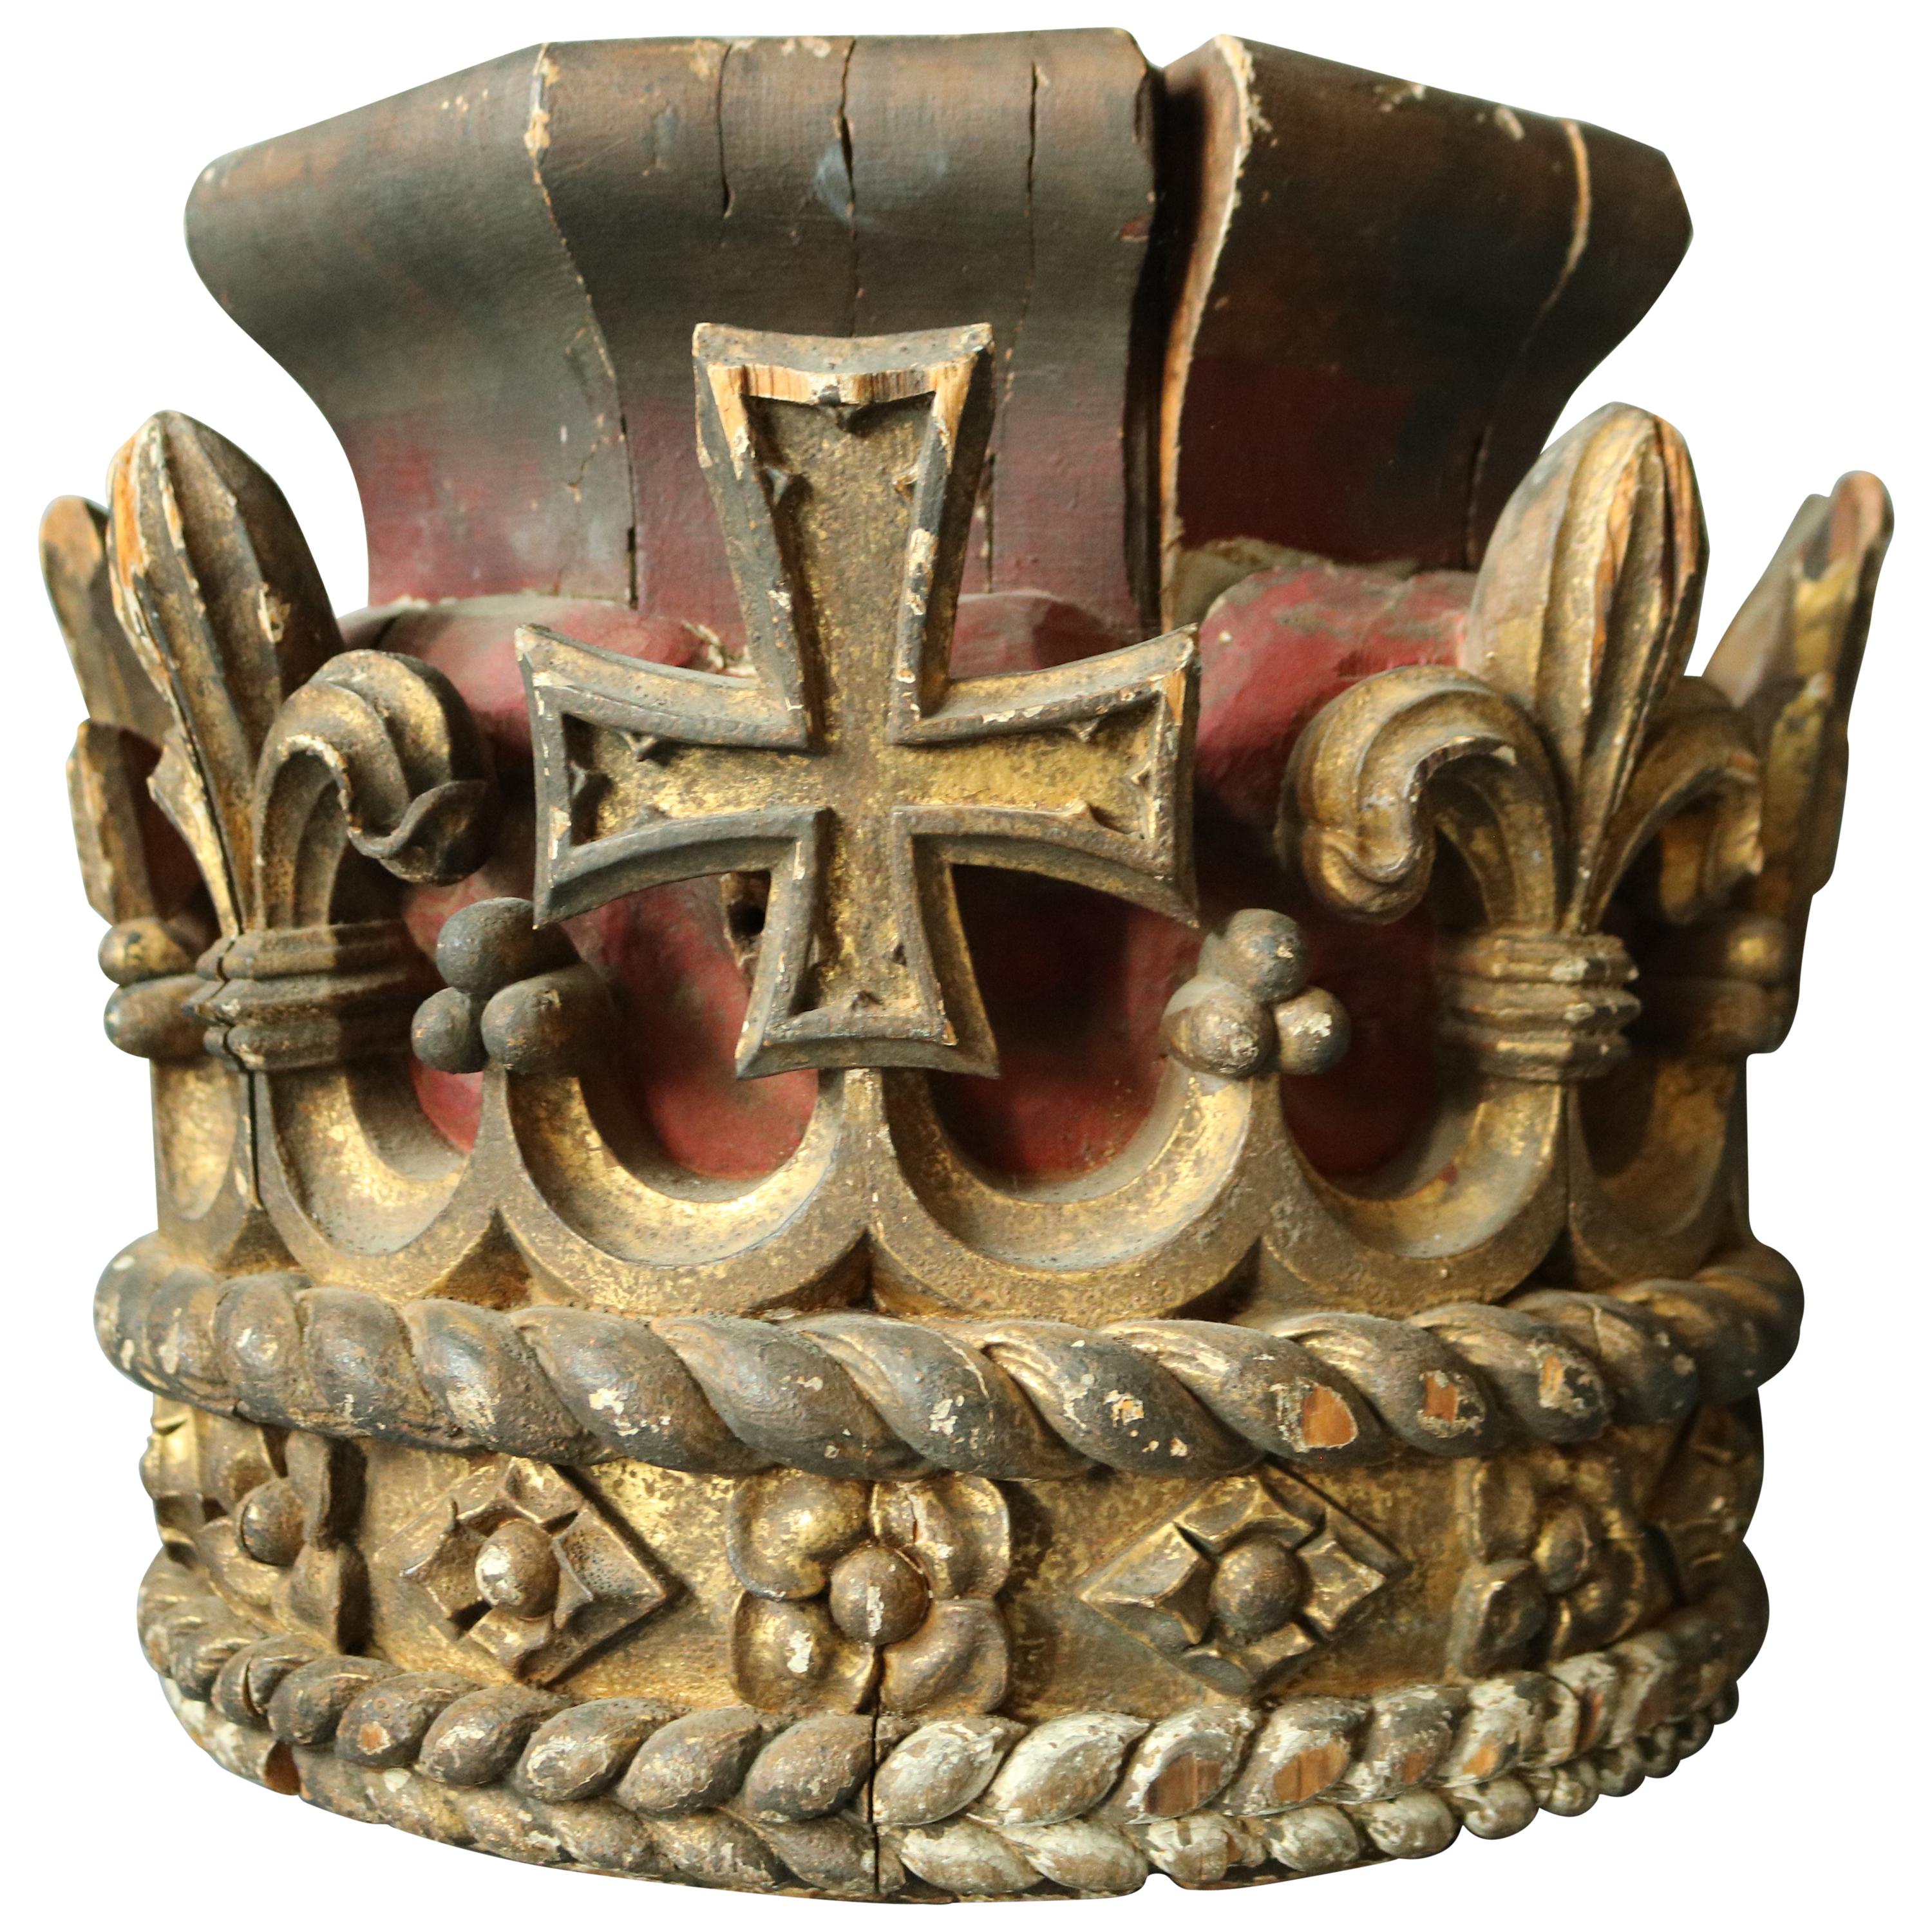 A rare and rather fantastic early 19th century carved and gilded crown with the stamp 